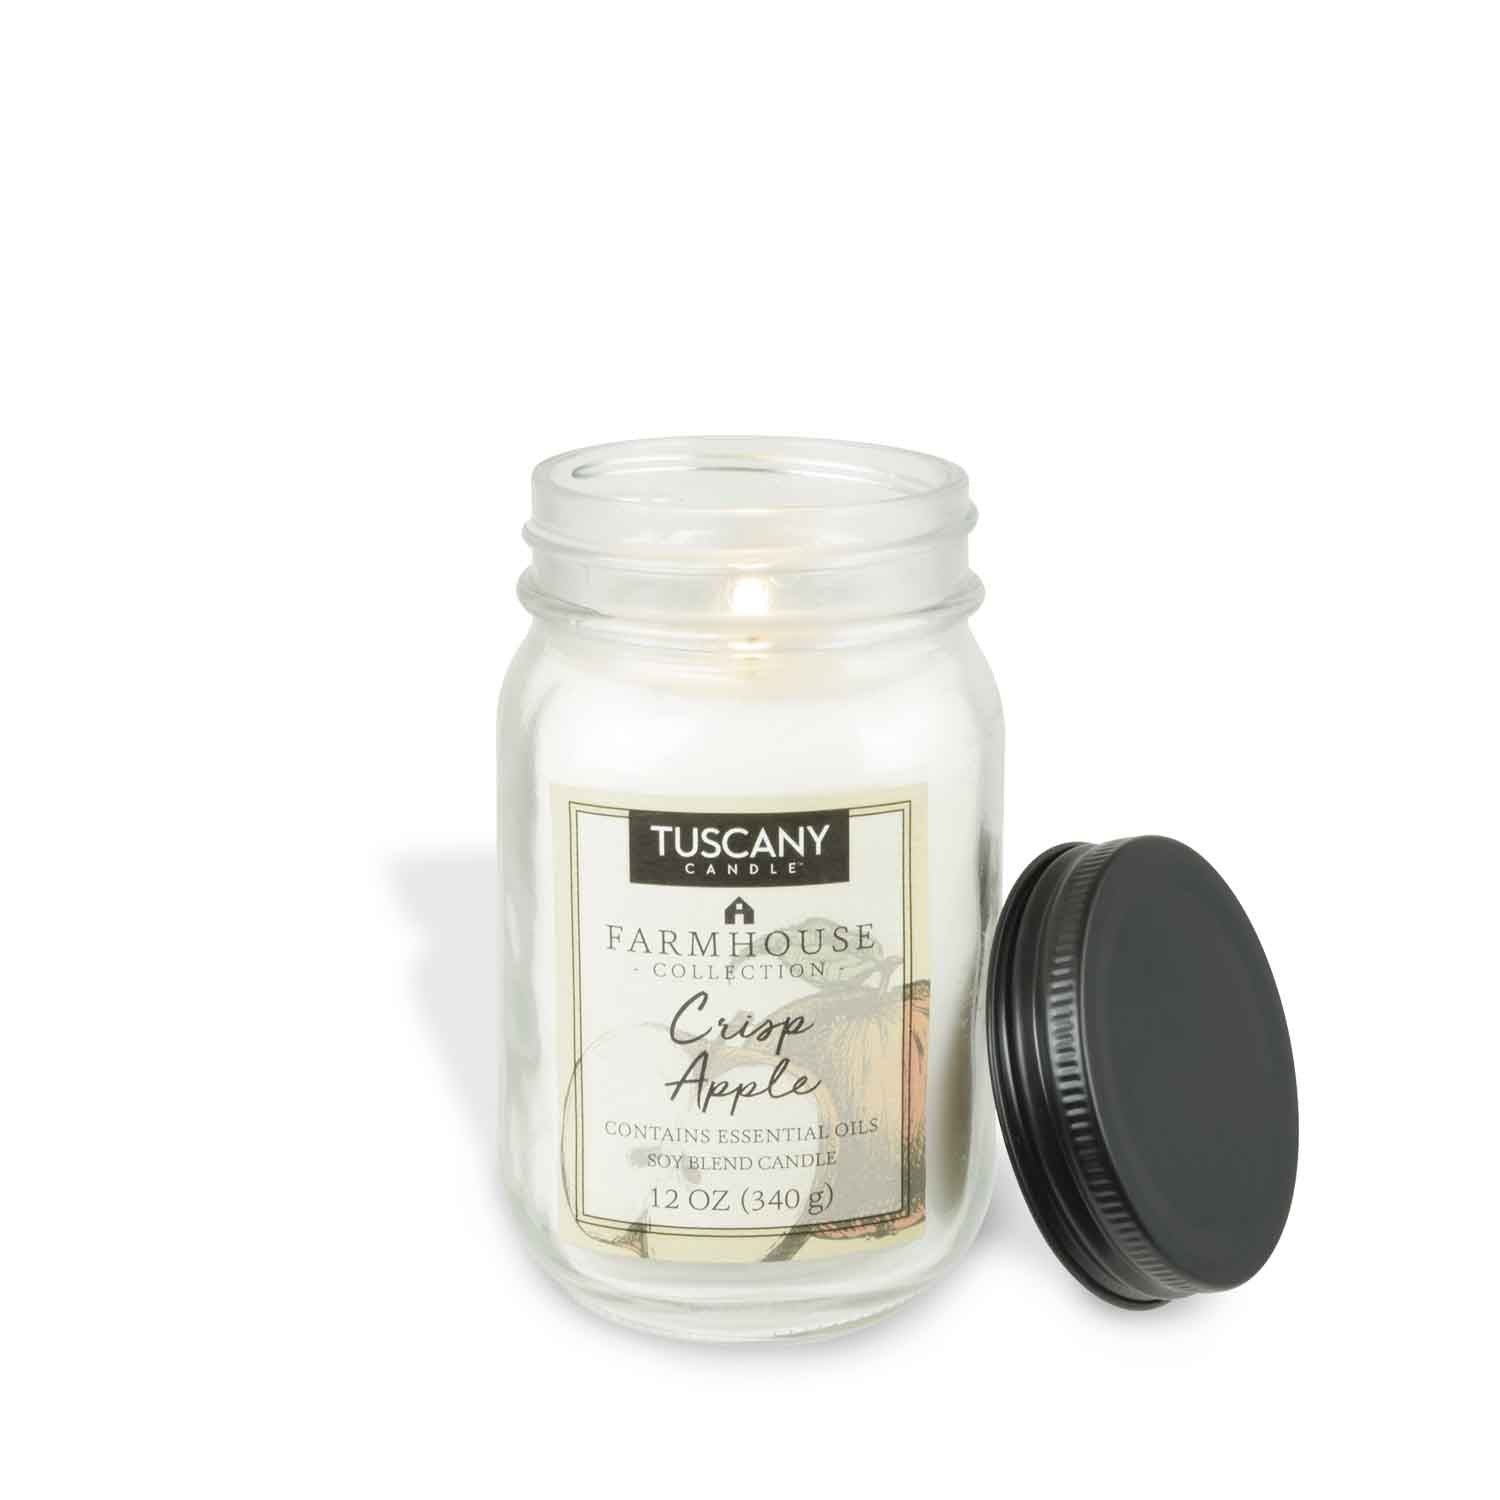 A Crisp Apple Scented Jar Candle (12 oz) – Farmhouse Collection by Tuscany Candle® EVD with a black lid next to it.